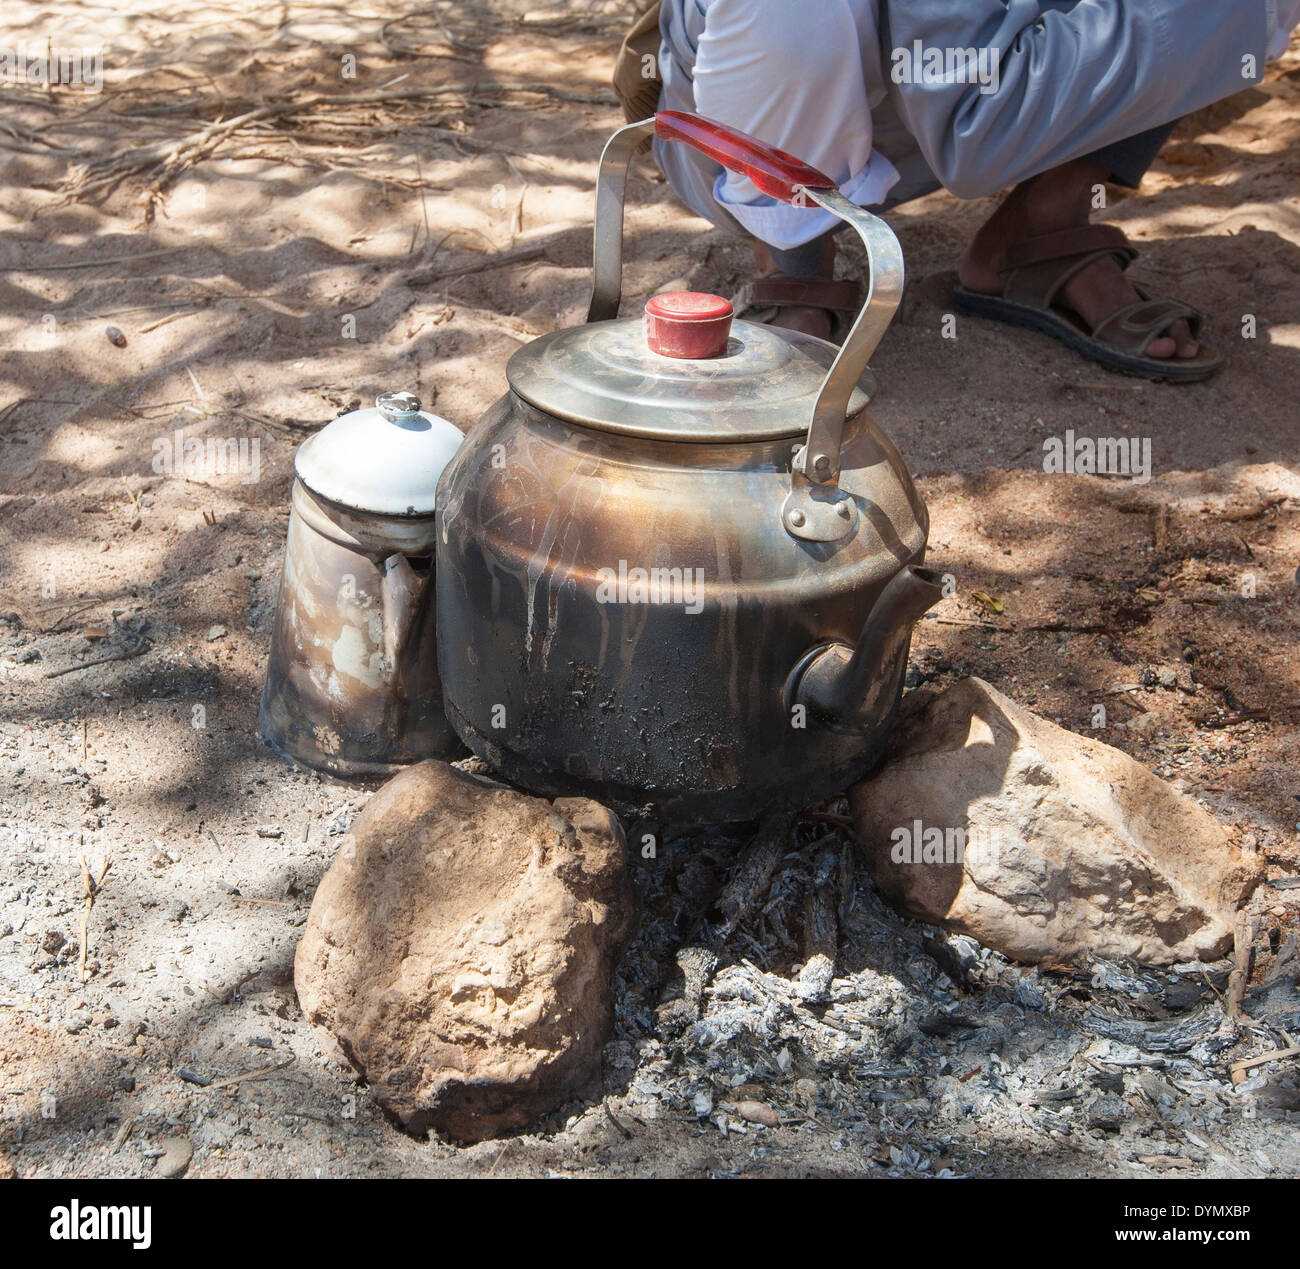 https://c8.alamy.com/comp/DYMXBP/traditional-kettle-on-camp-fire-in-desert-with-local-bedouin-man-DYMXBP.jpg